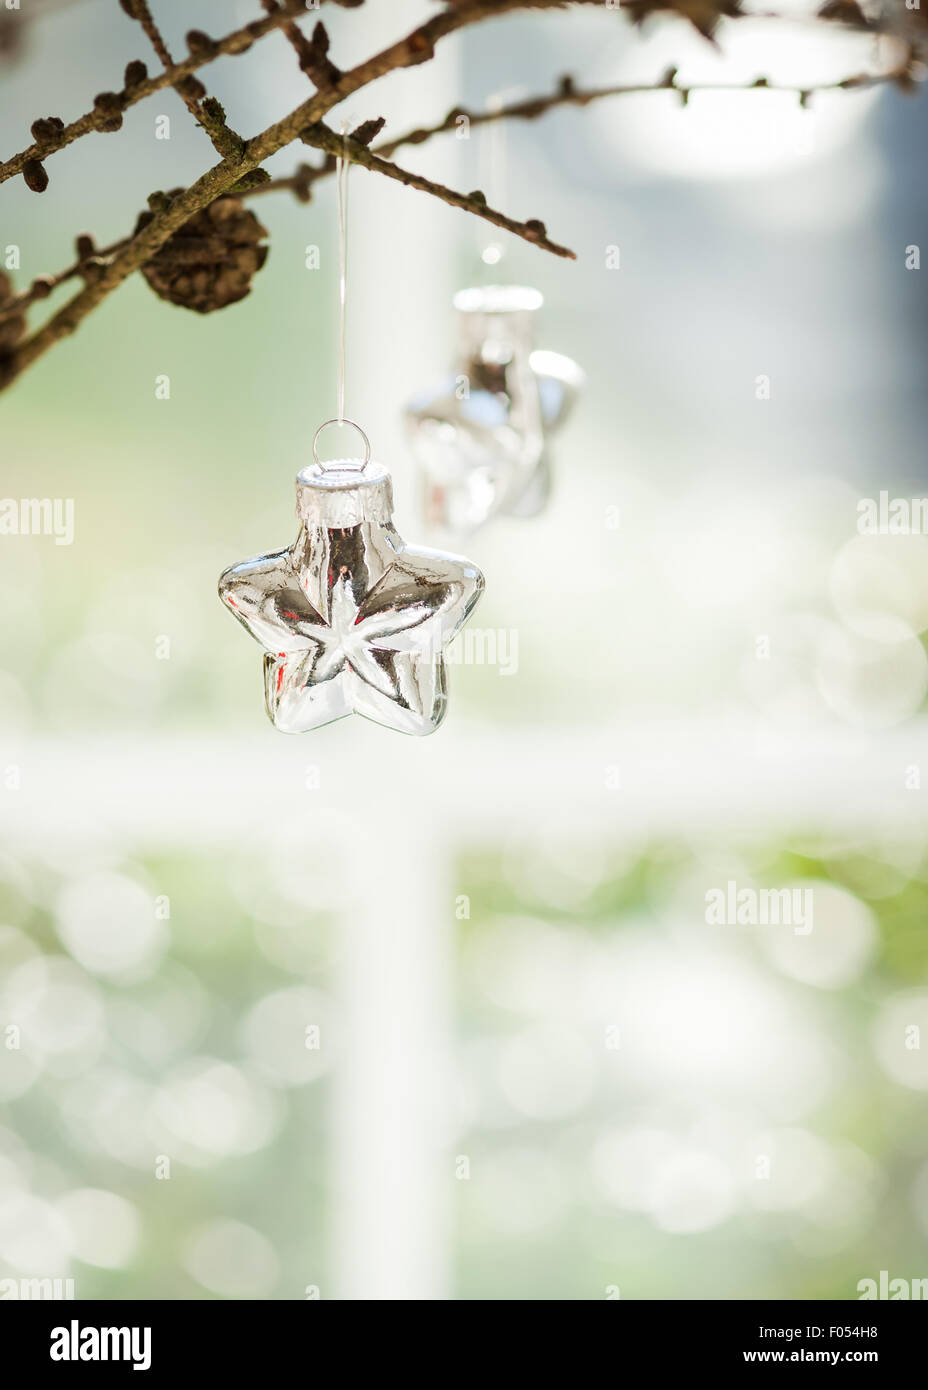 star-shaped silver bauble hanging from twig with pine cones and blurred window view Stock Photo